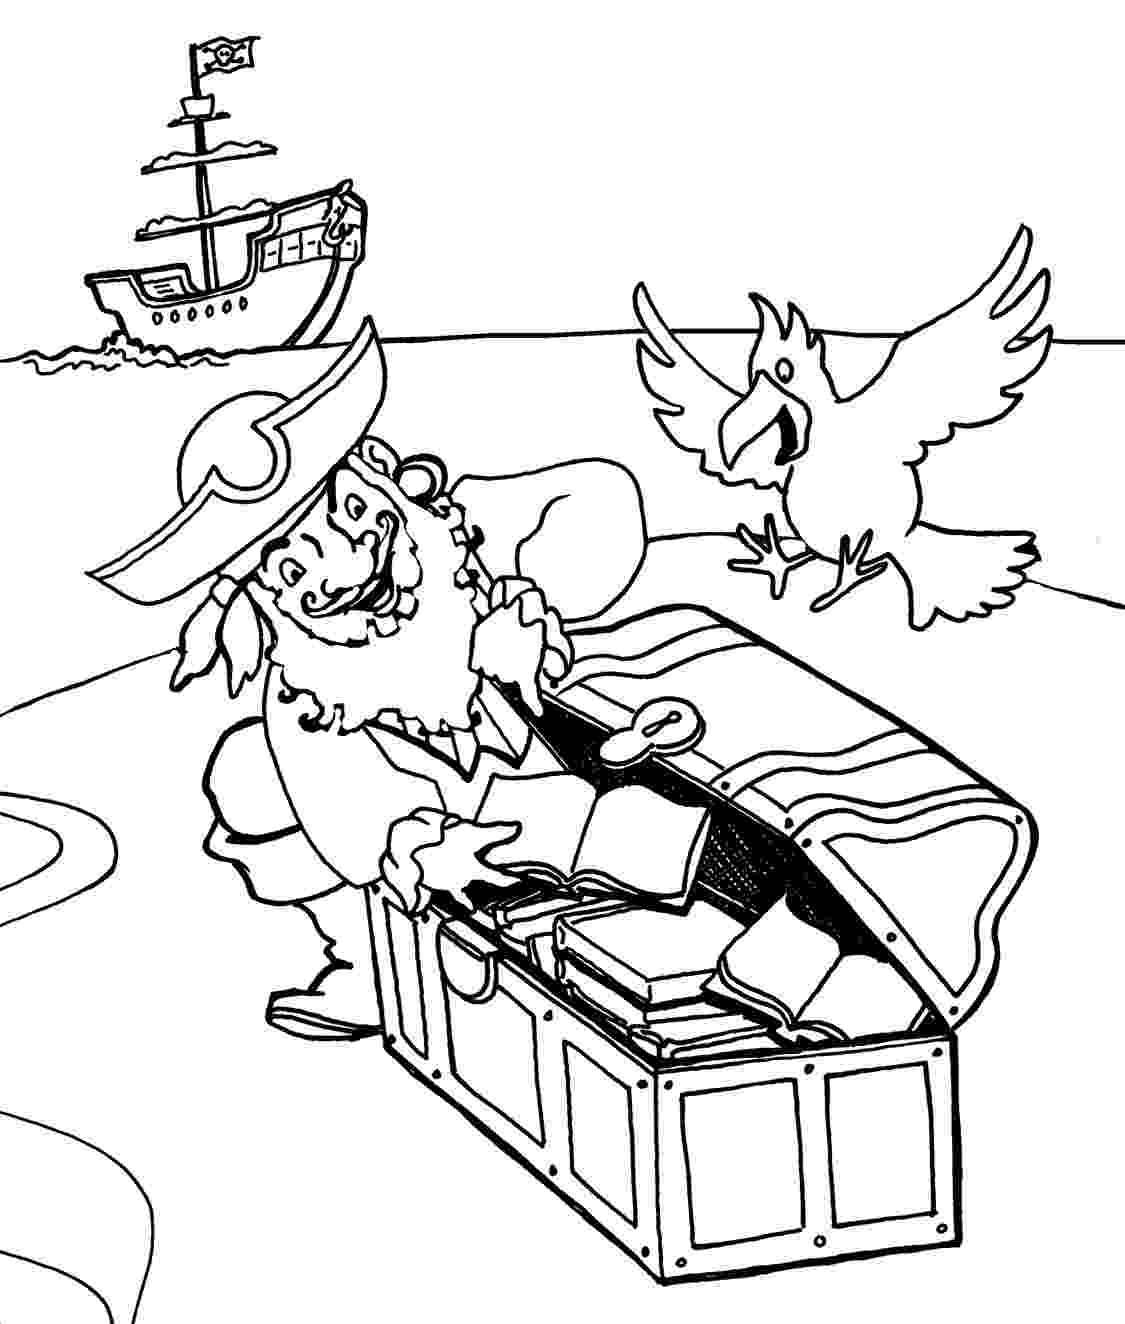 pirate coloring pages for kids printable pirate colouring pages for kids in the playroom printable coloring pages pirate for kids 